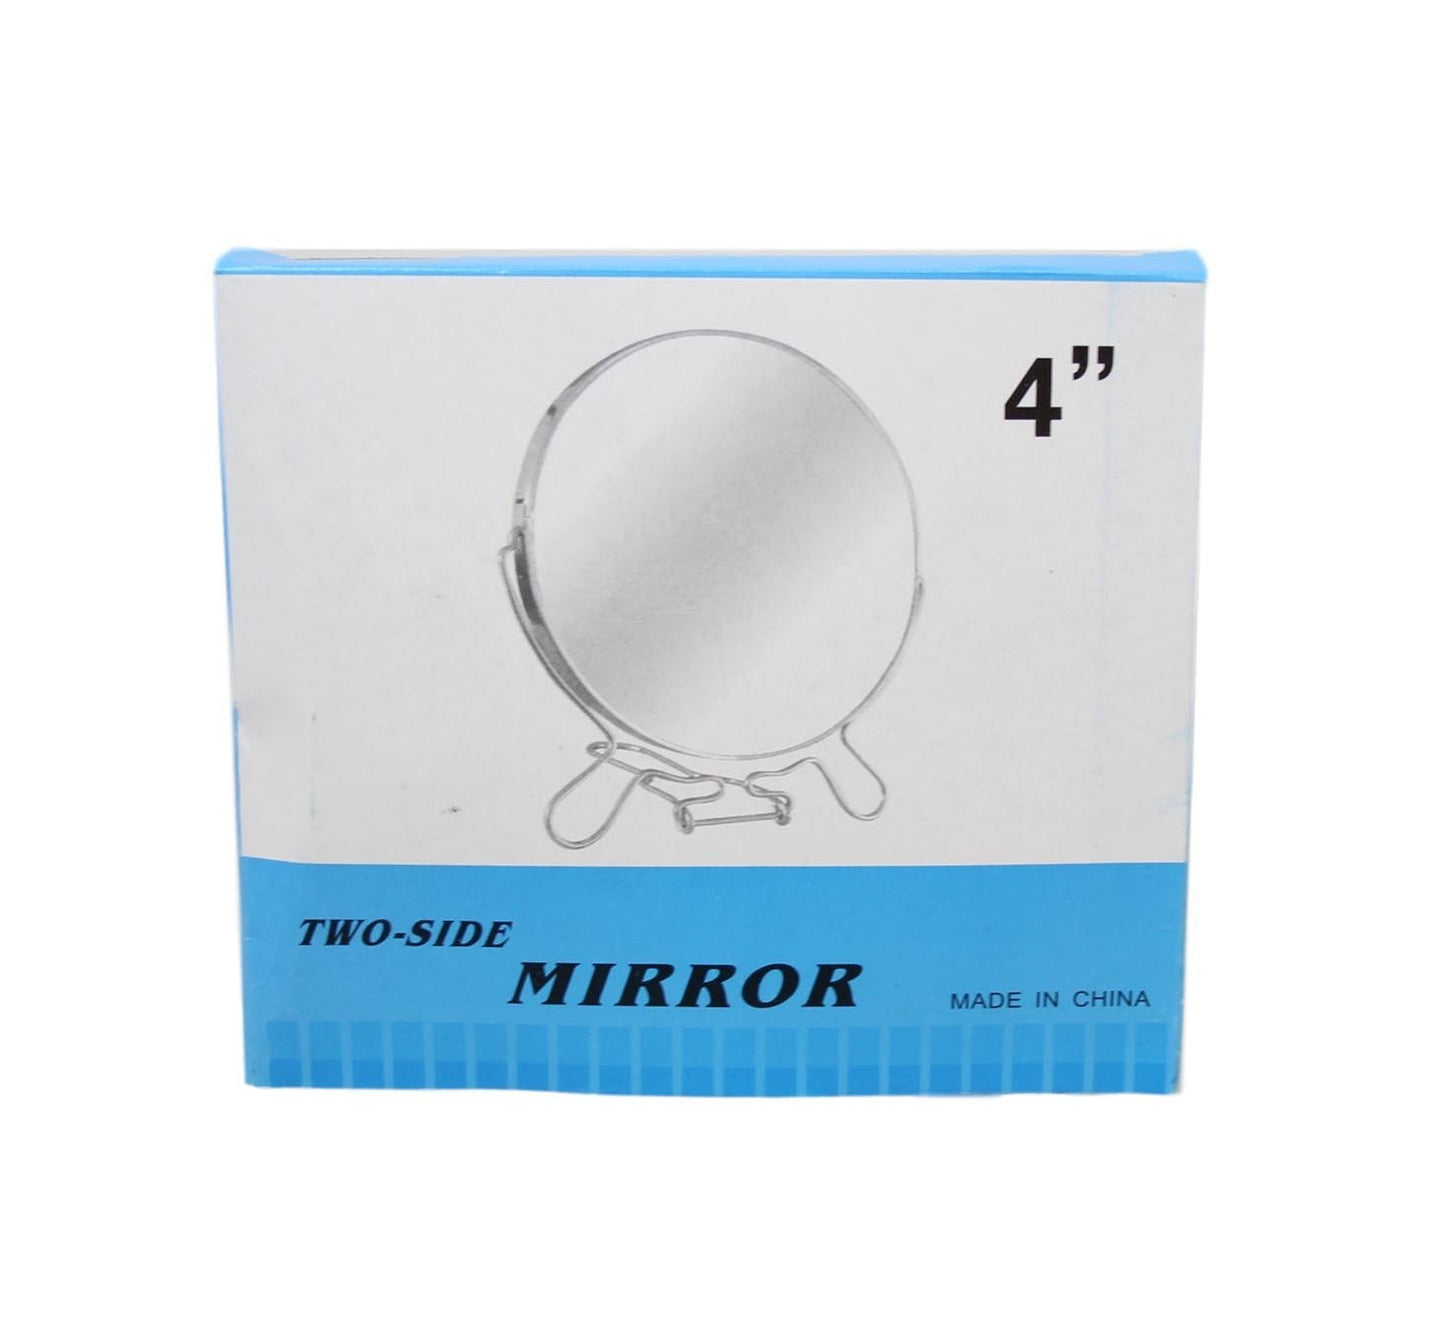 4 Inch Cosmetic Make up Shaving Magnifying Round on Stand 2 Sided Mirrors 5955 (Large Letter Rate)